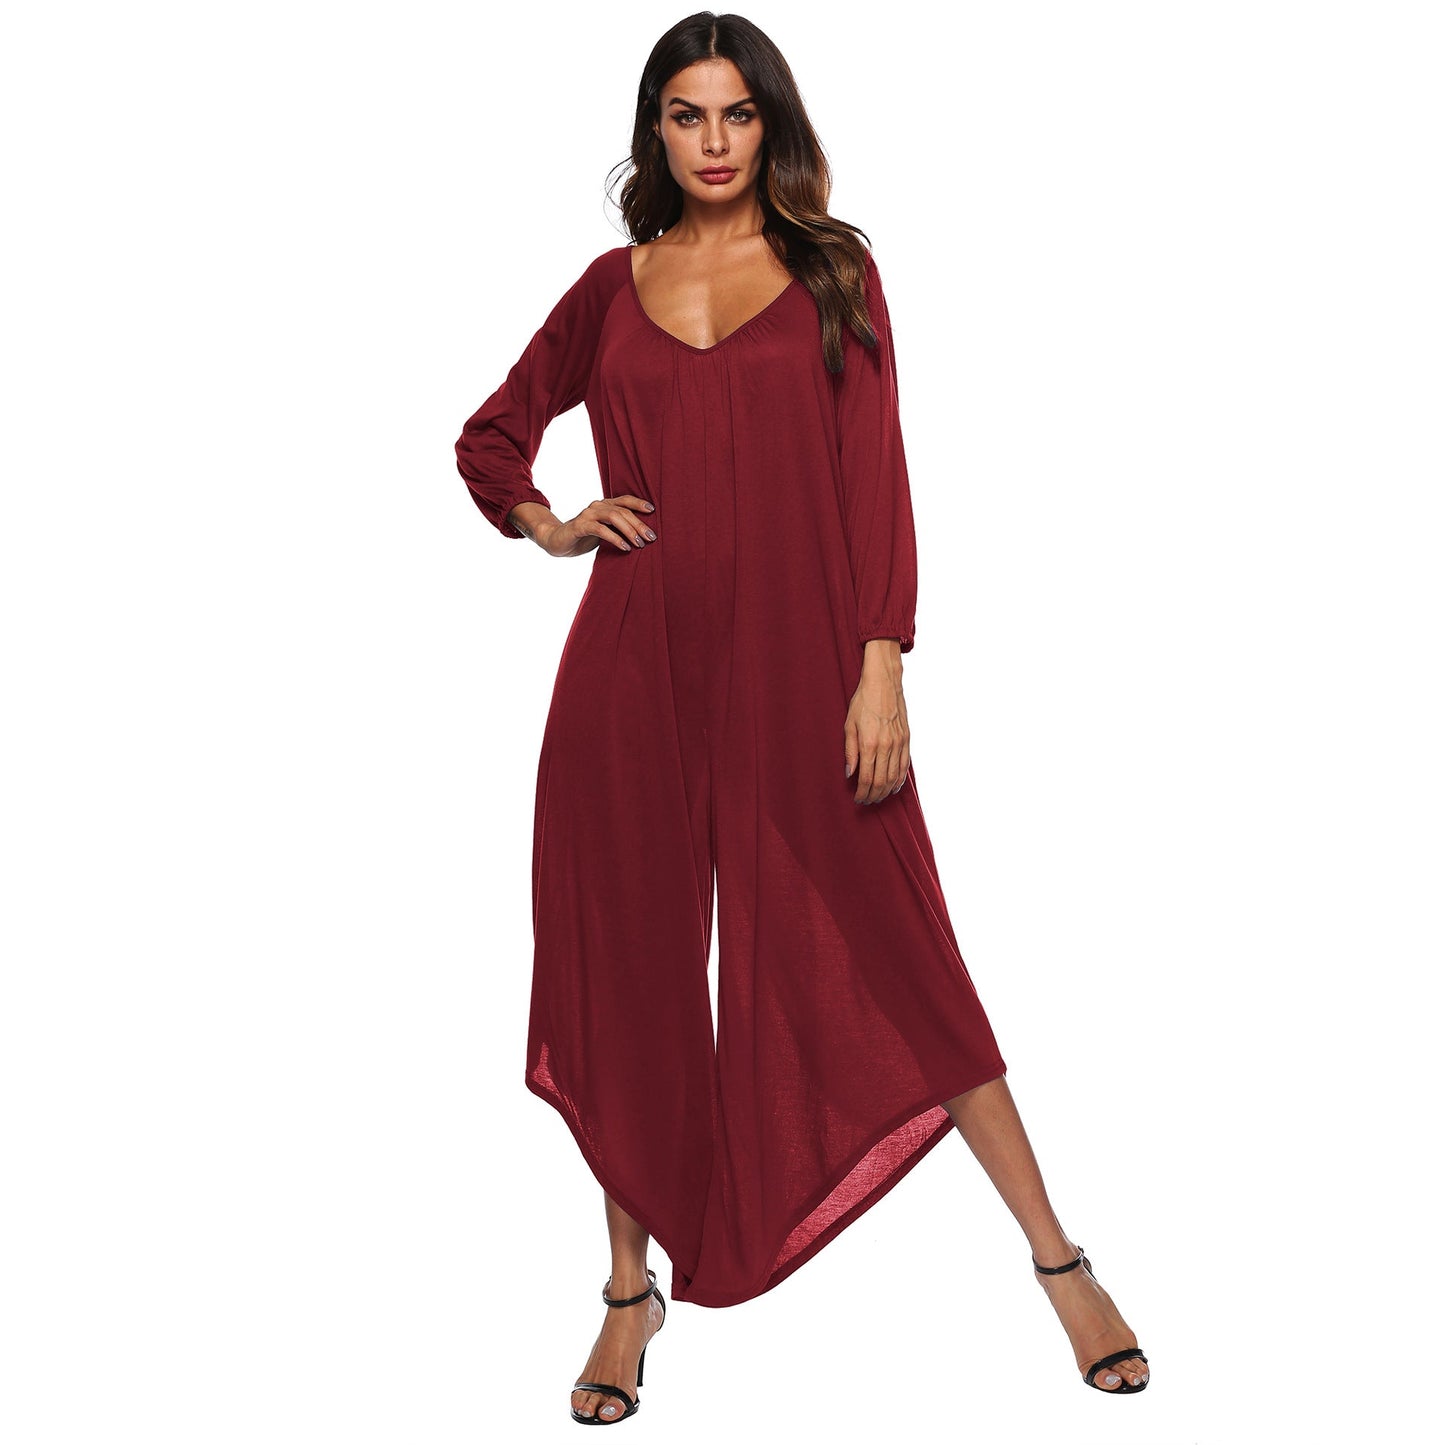 Sexy Deep V Neck Backless Jumpsuits for Women-Jumpsuits & Rompers-Wine Red-S-Free Shipping at meselling99